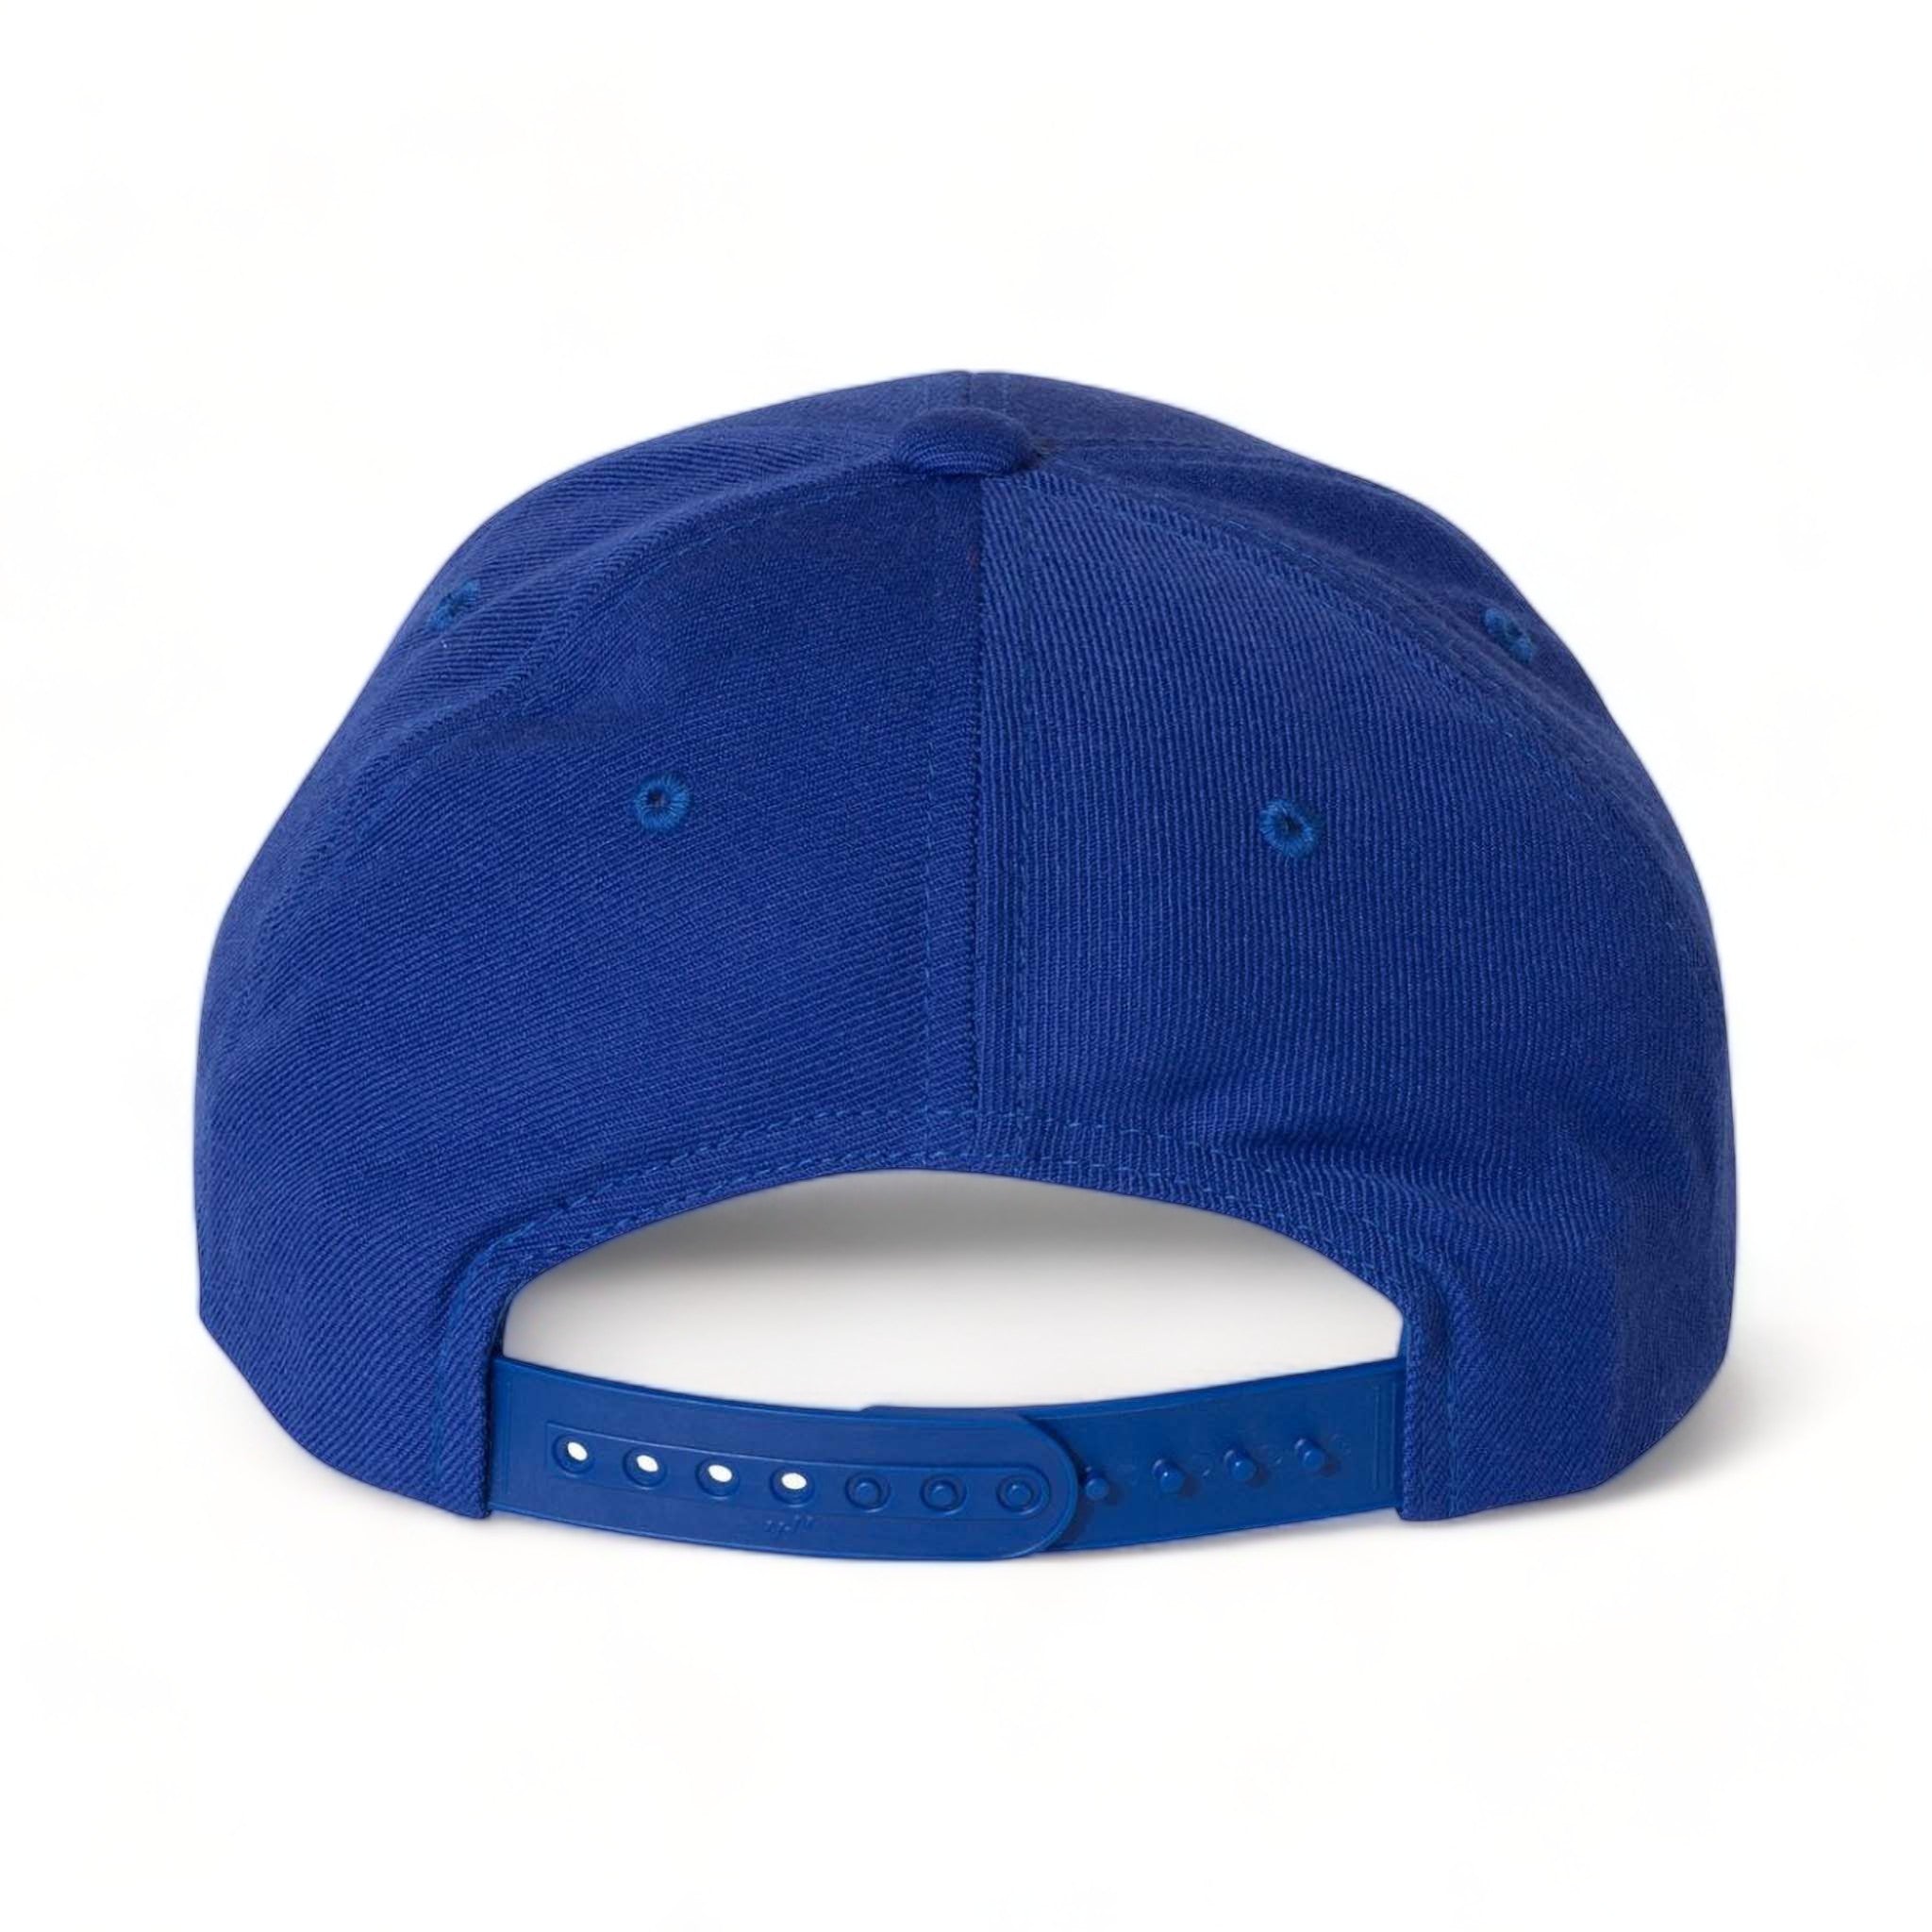 Back view of YP Classics 6789M custom hat in royal